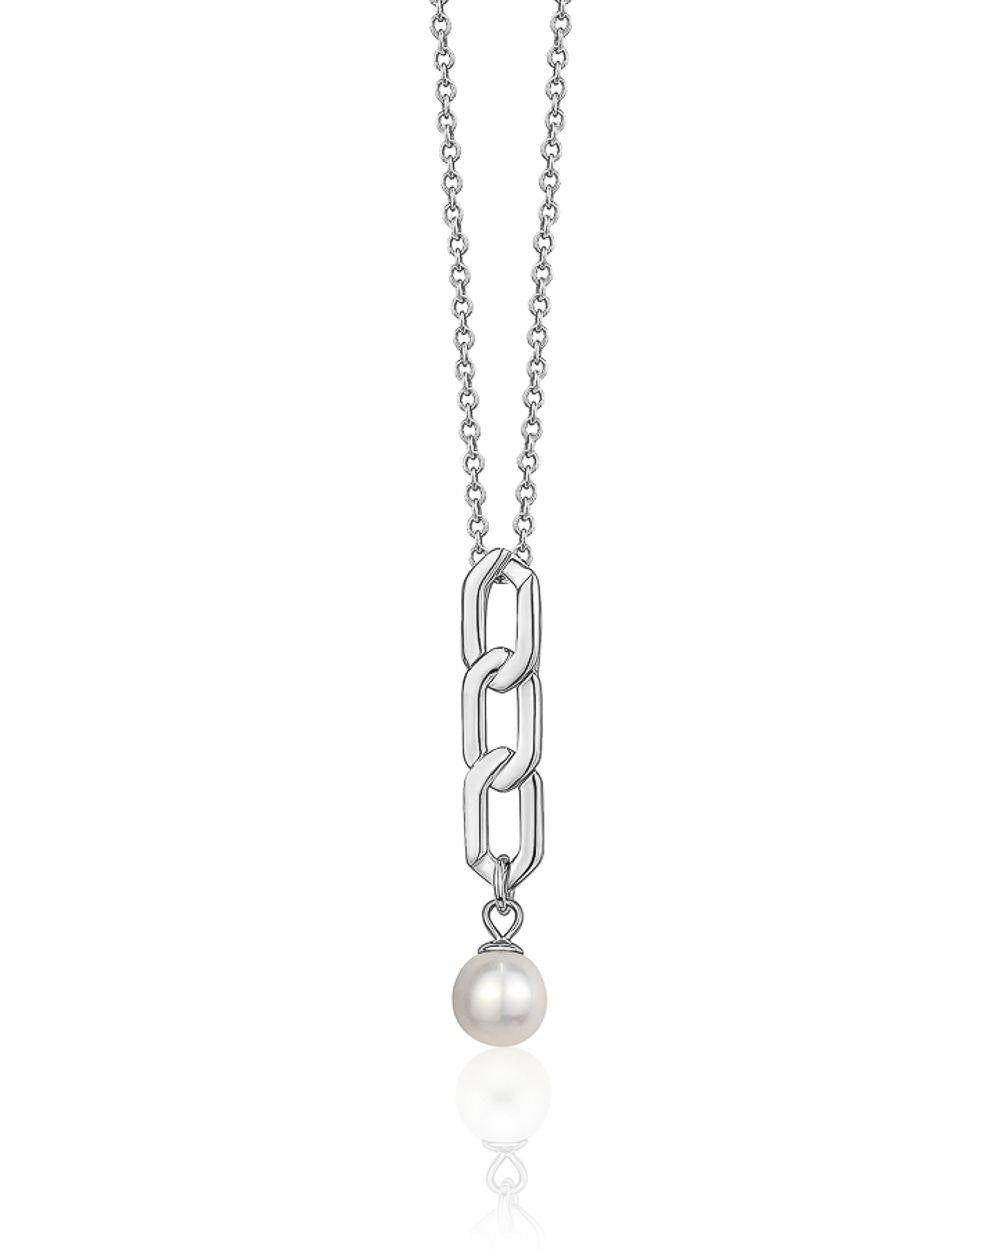 Chain Link Pearl Necklace!